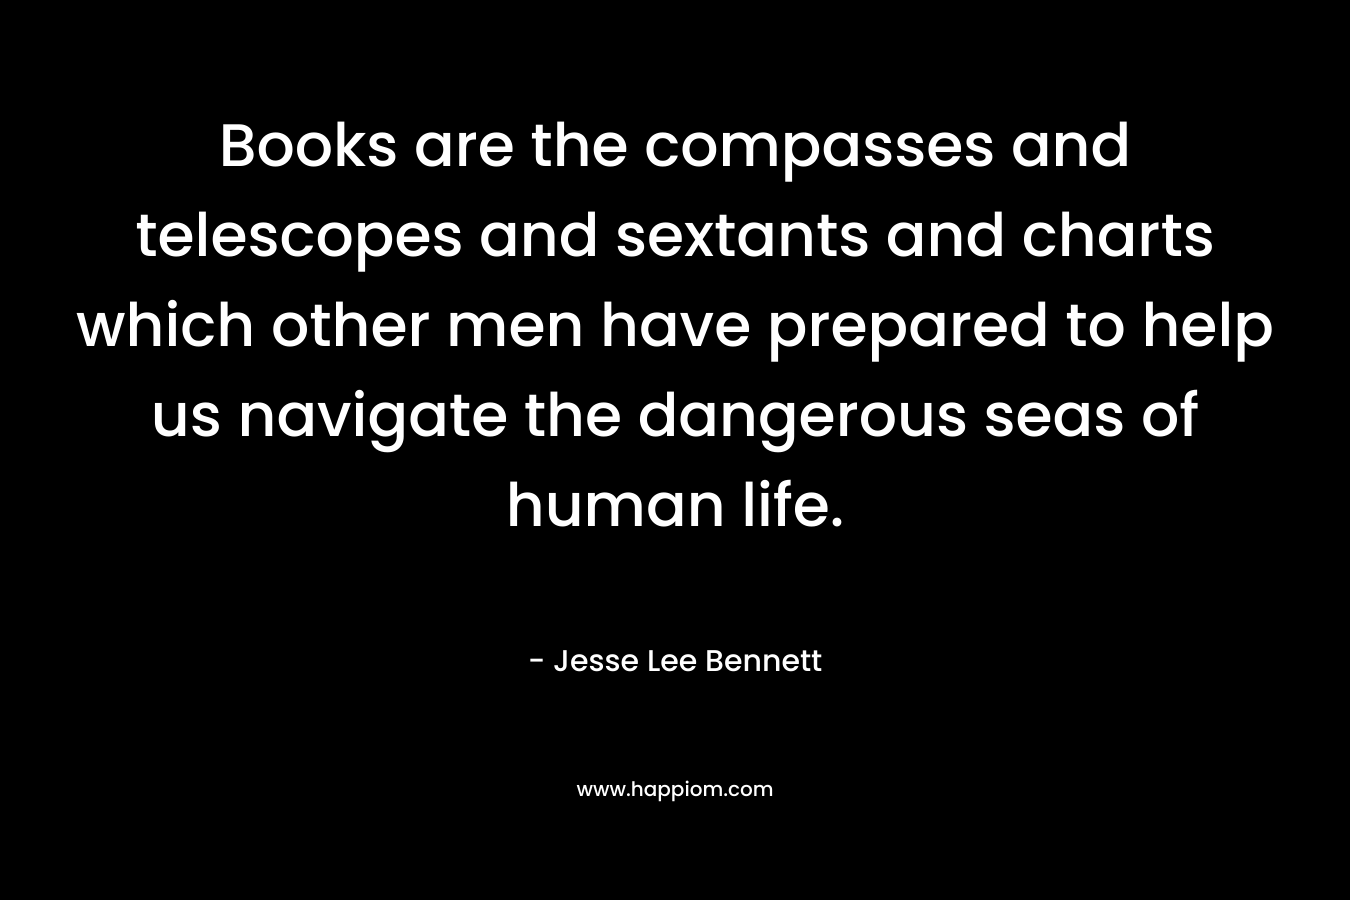 Books are the compasses and telescopes and sextants and charts which other men have prepared to help us navigate the dangerous seas of human life.